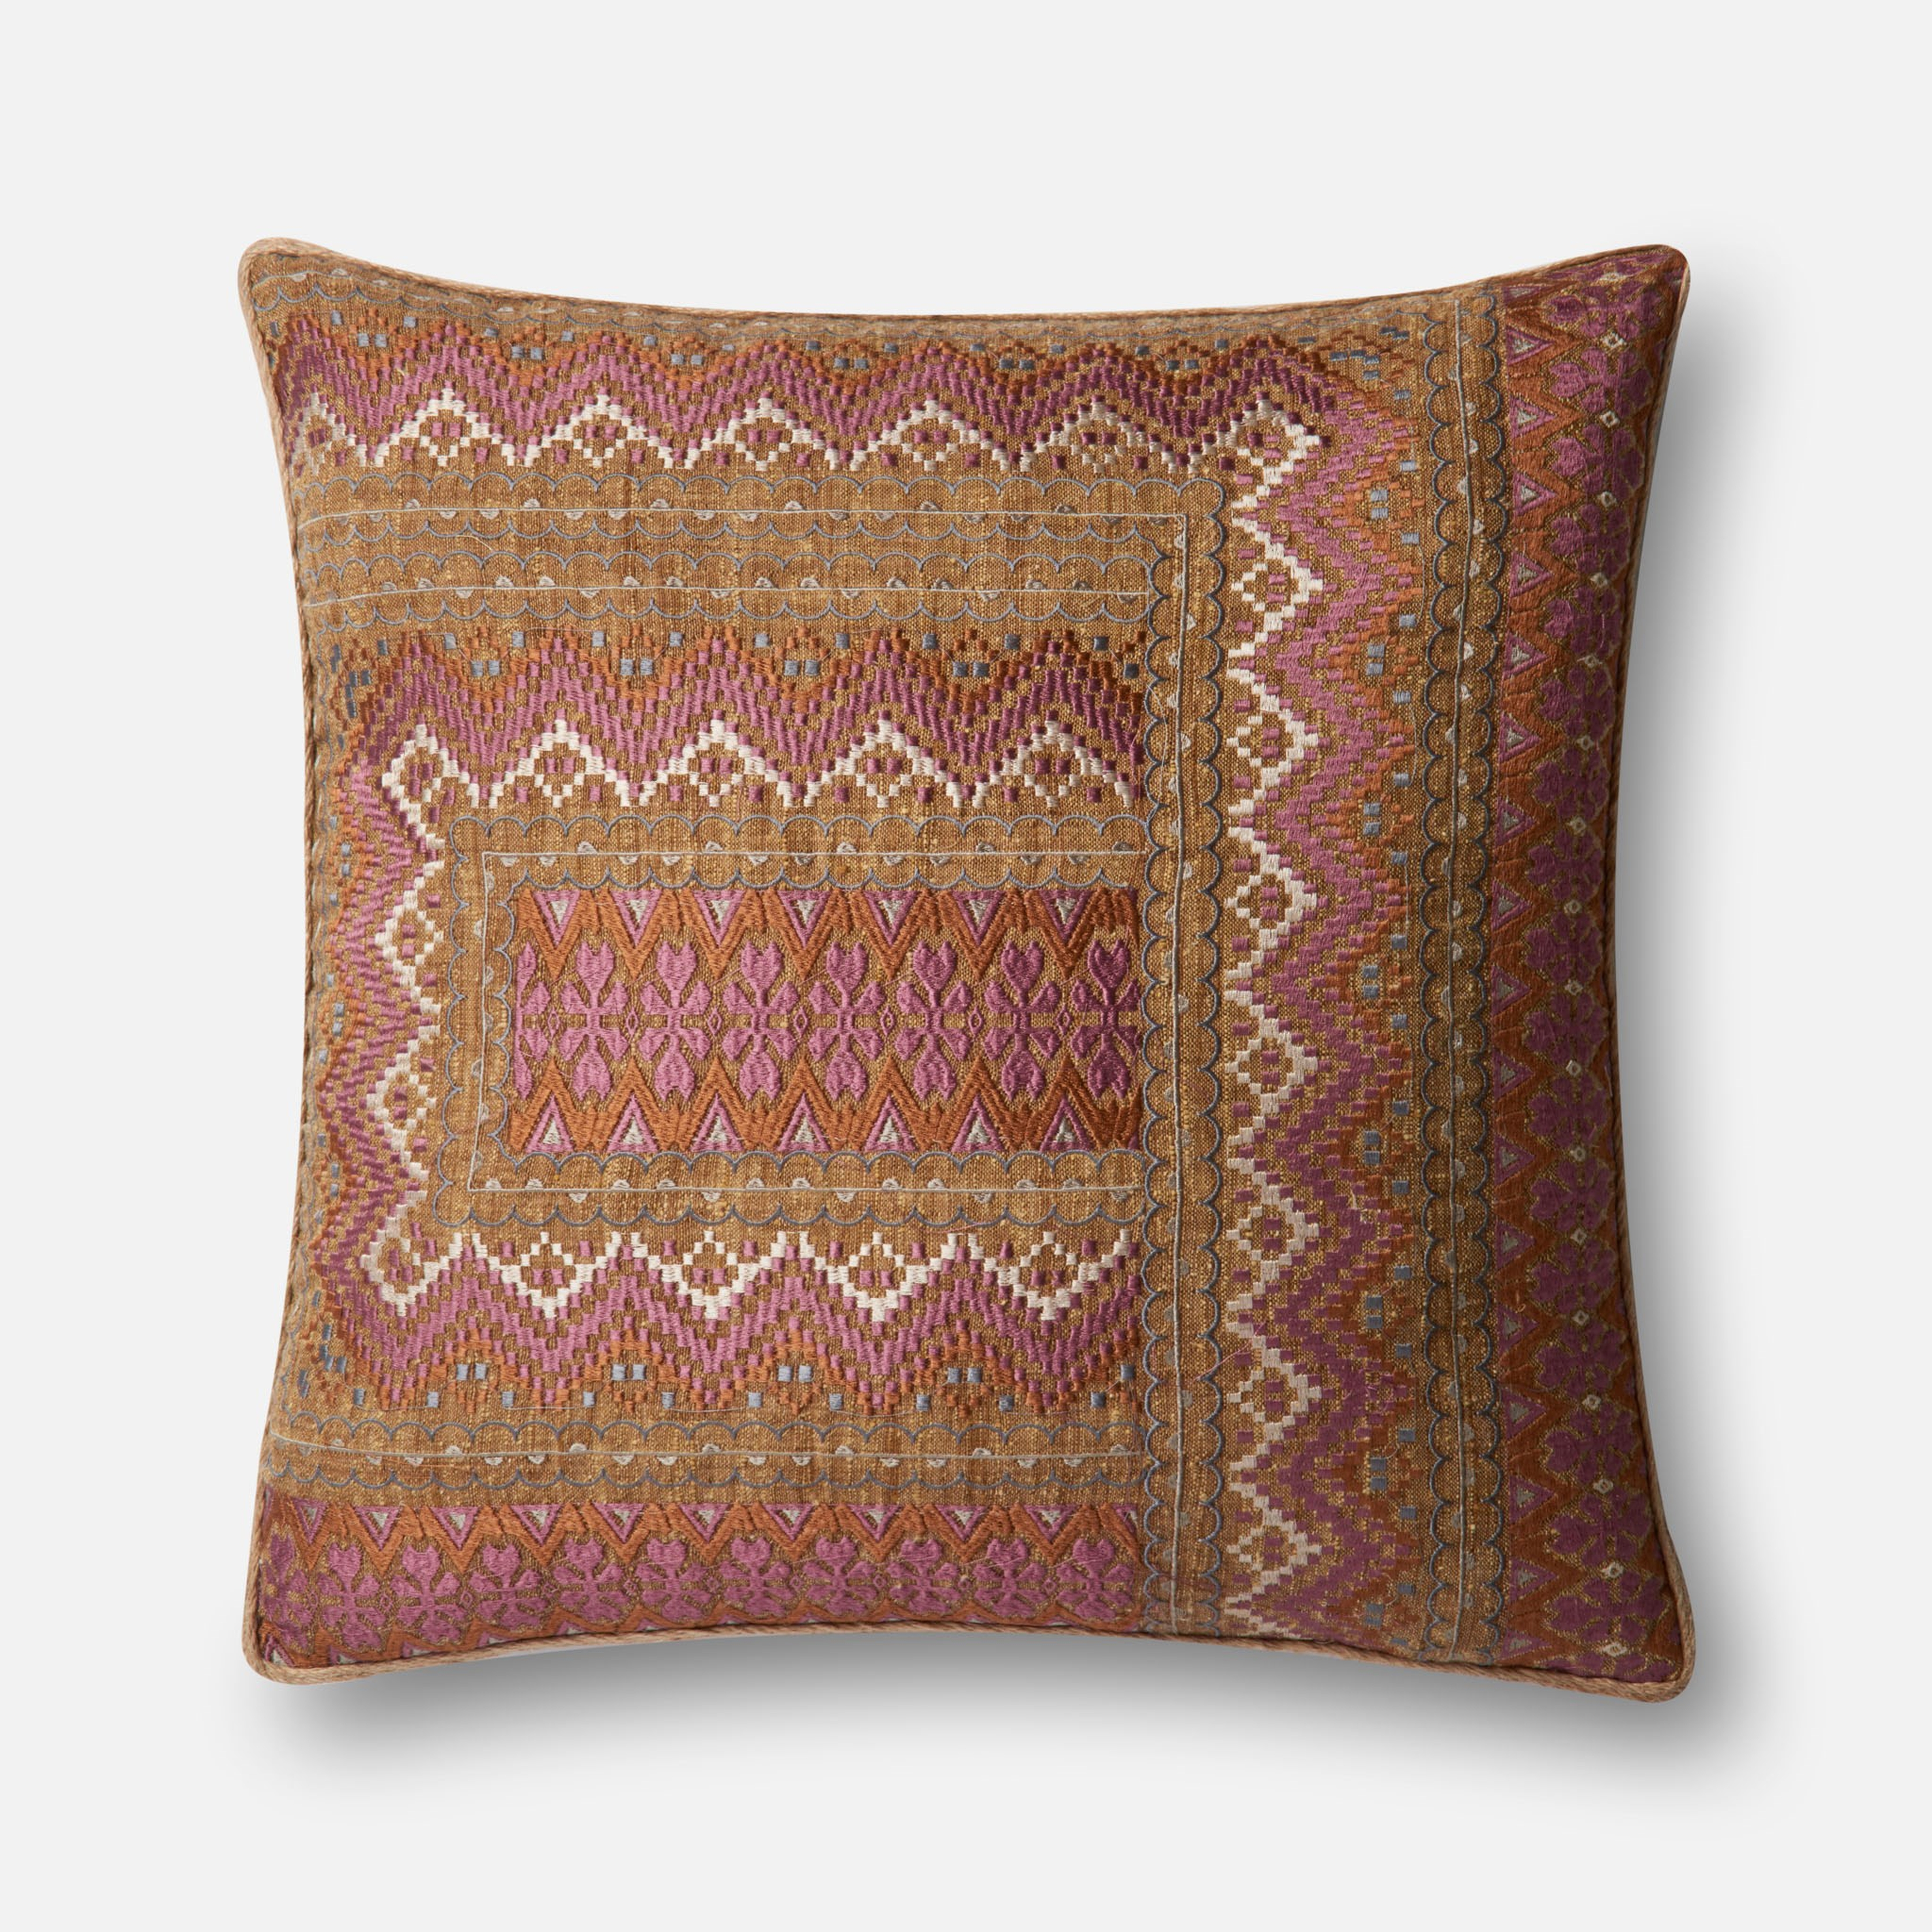 DSET Pillow PINK / RUST 22" X 22" Cover w/Down - Loloi Rugs